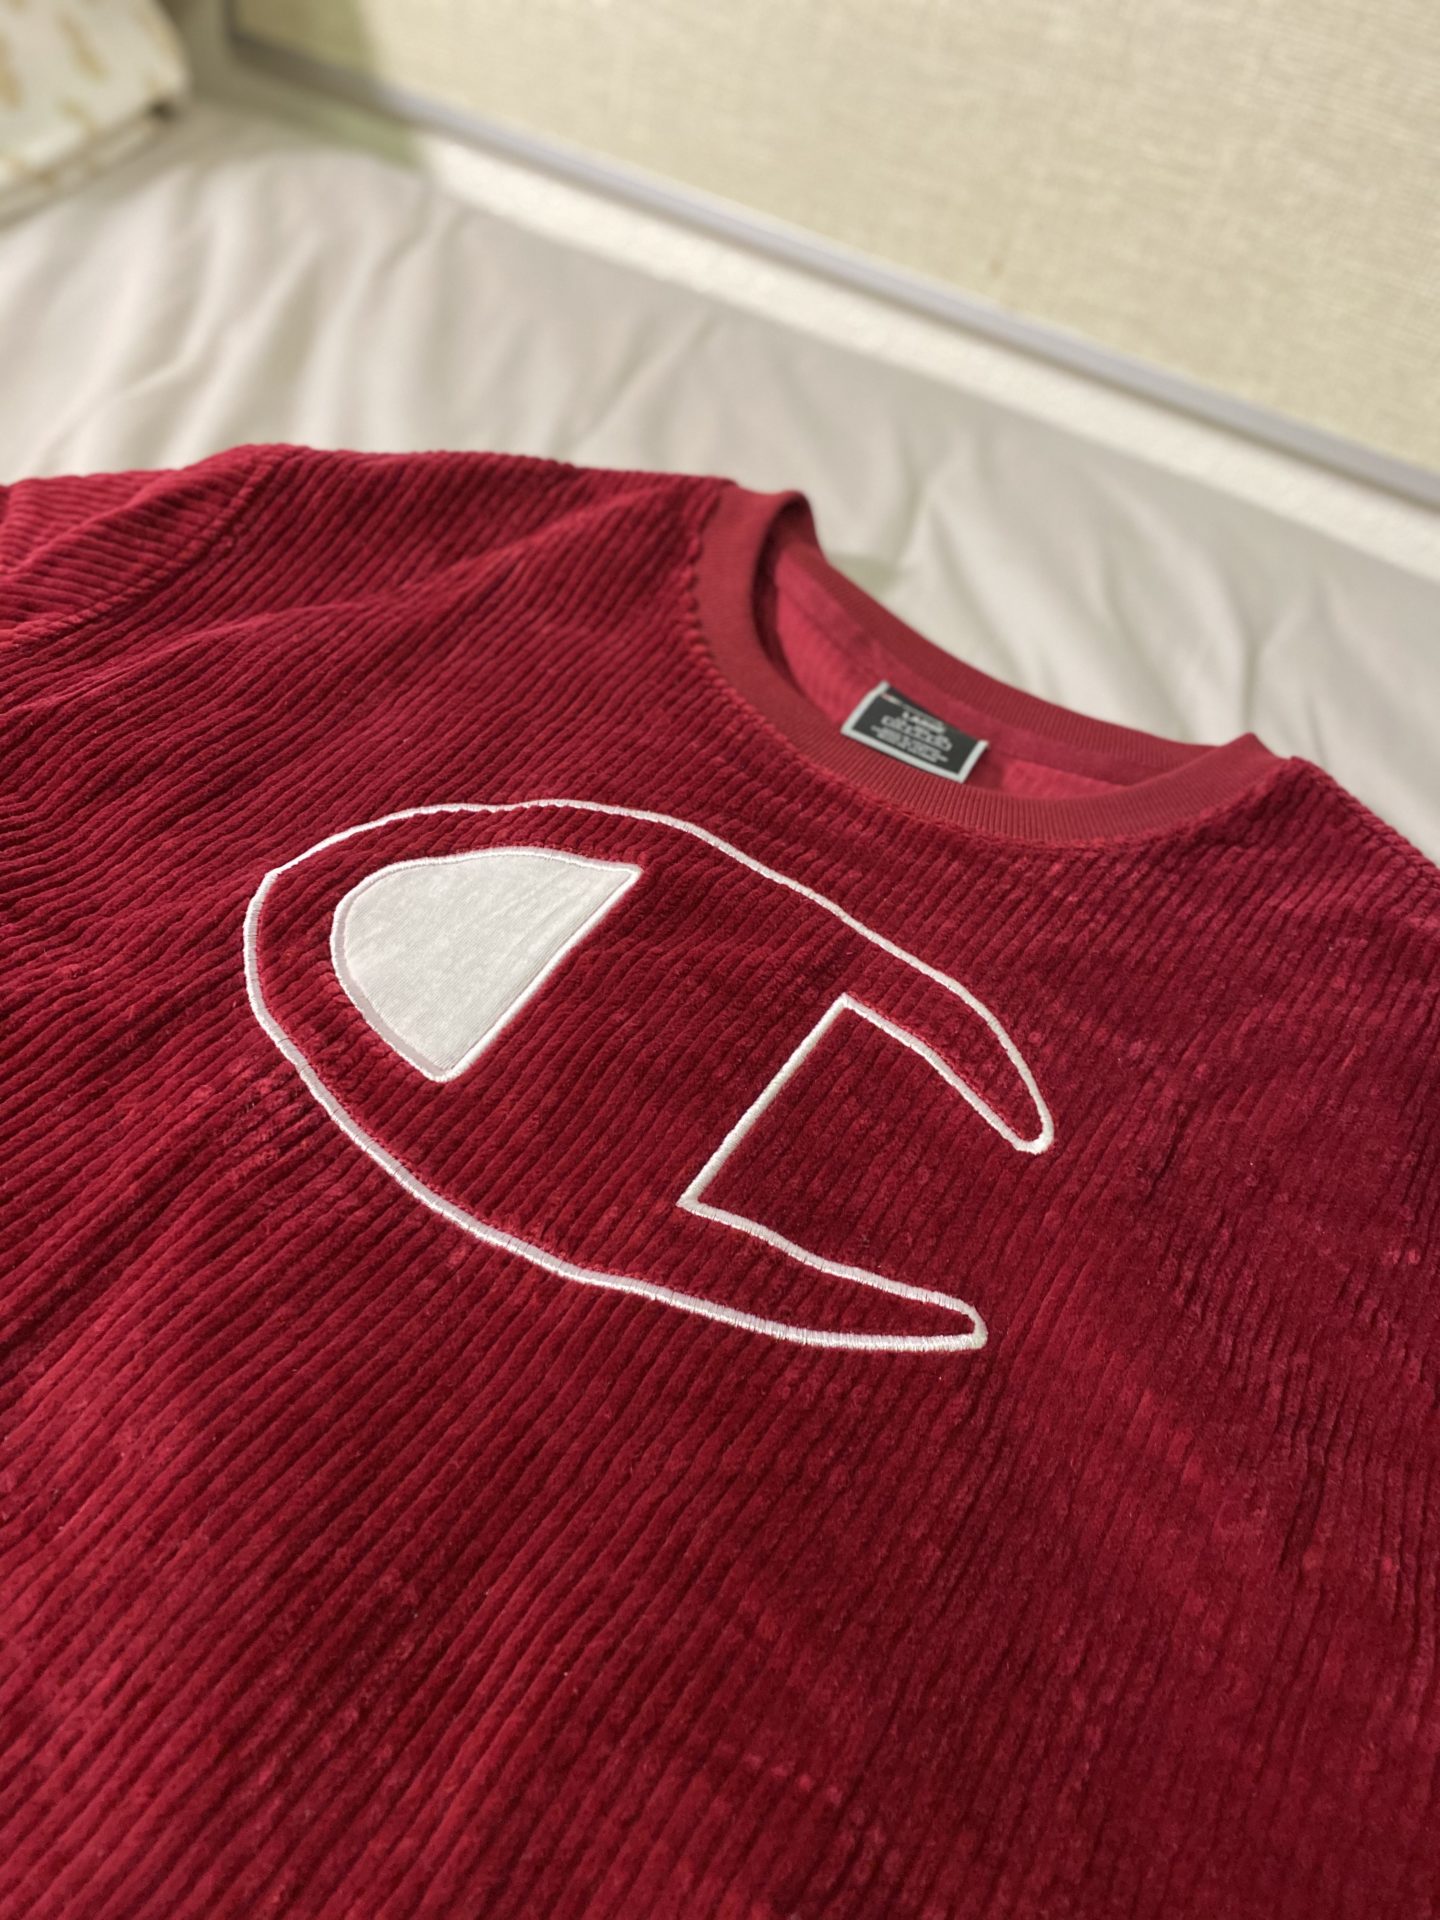 A review of Champion: the trendy sportswear brand - The Mossy Log